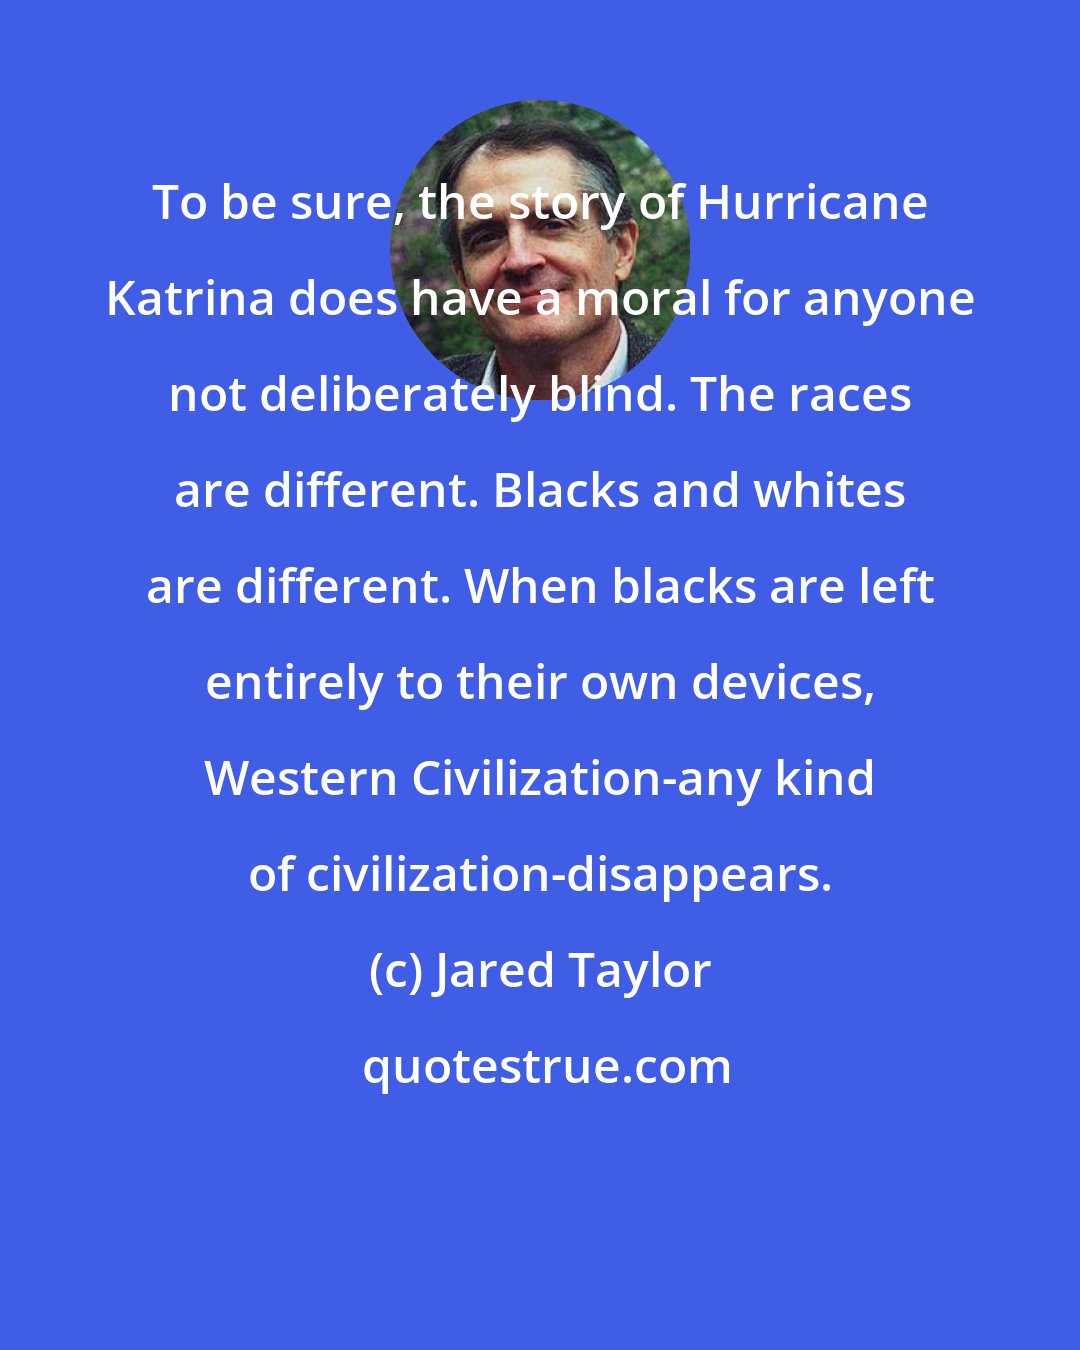 Jared Taylor: To be sure, the story of Hurricane Katrina does have a moral for anyone not deliberately blind. The races are different. Blacks and whites are different. When blacks are left entirely to their own devices, Western Civilization-any kind of civilization-disappears.